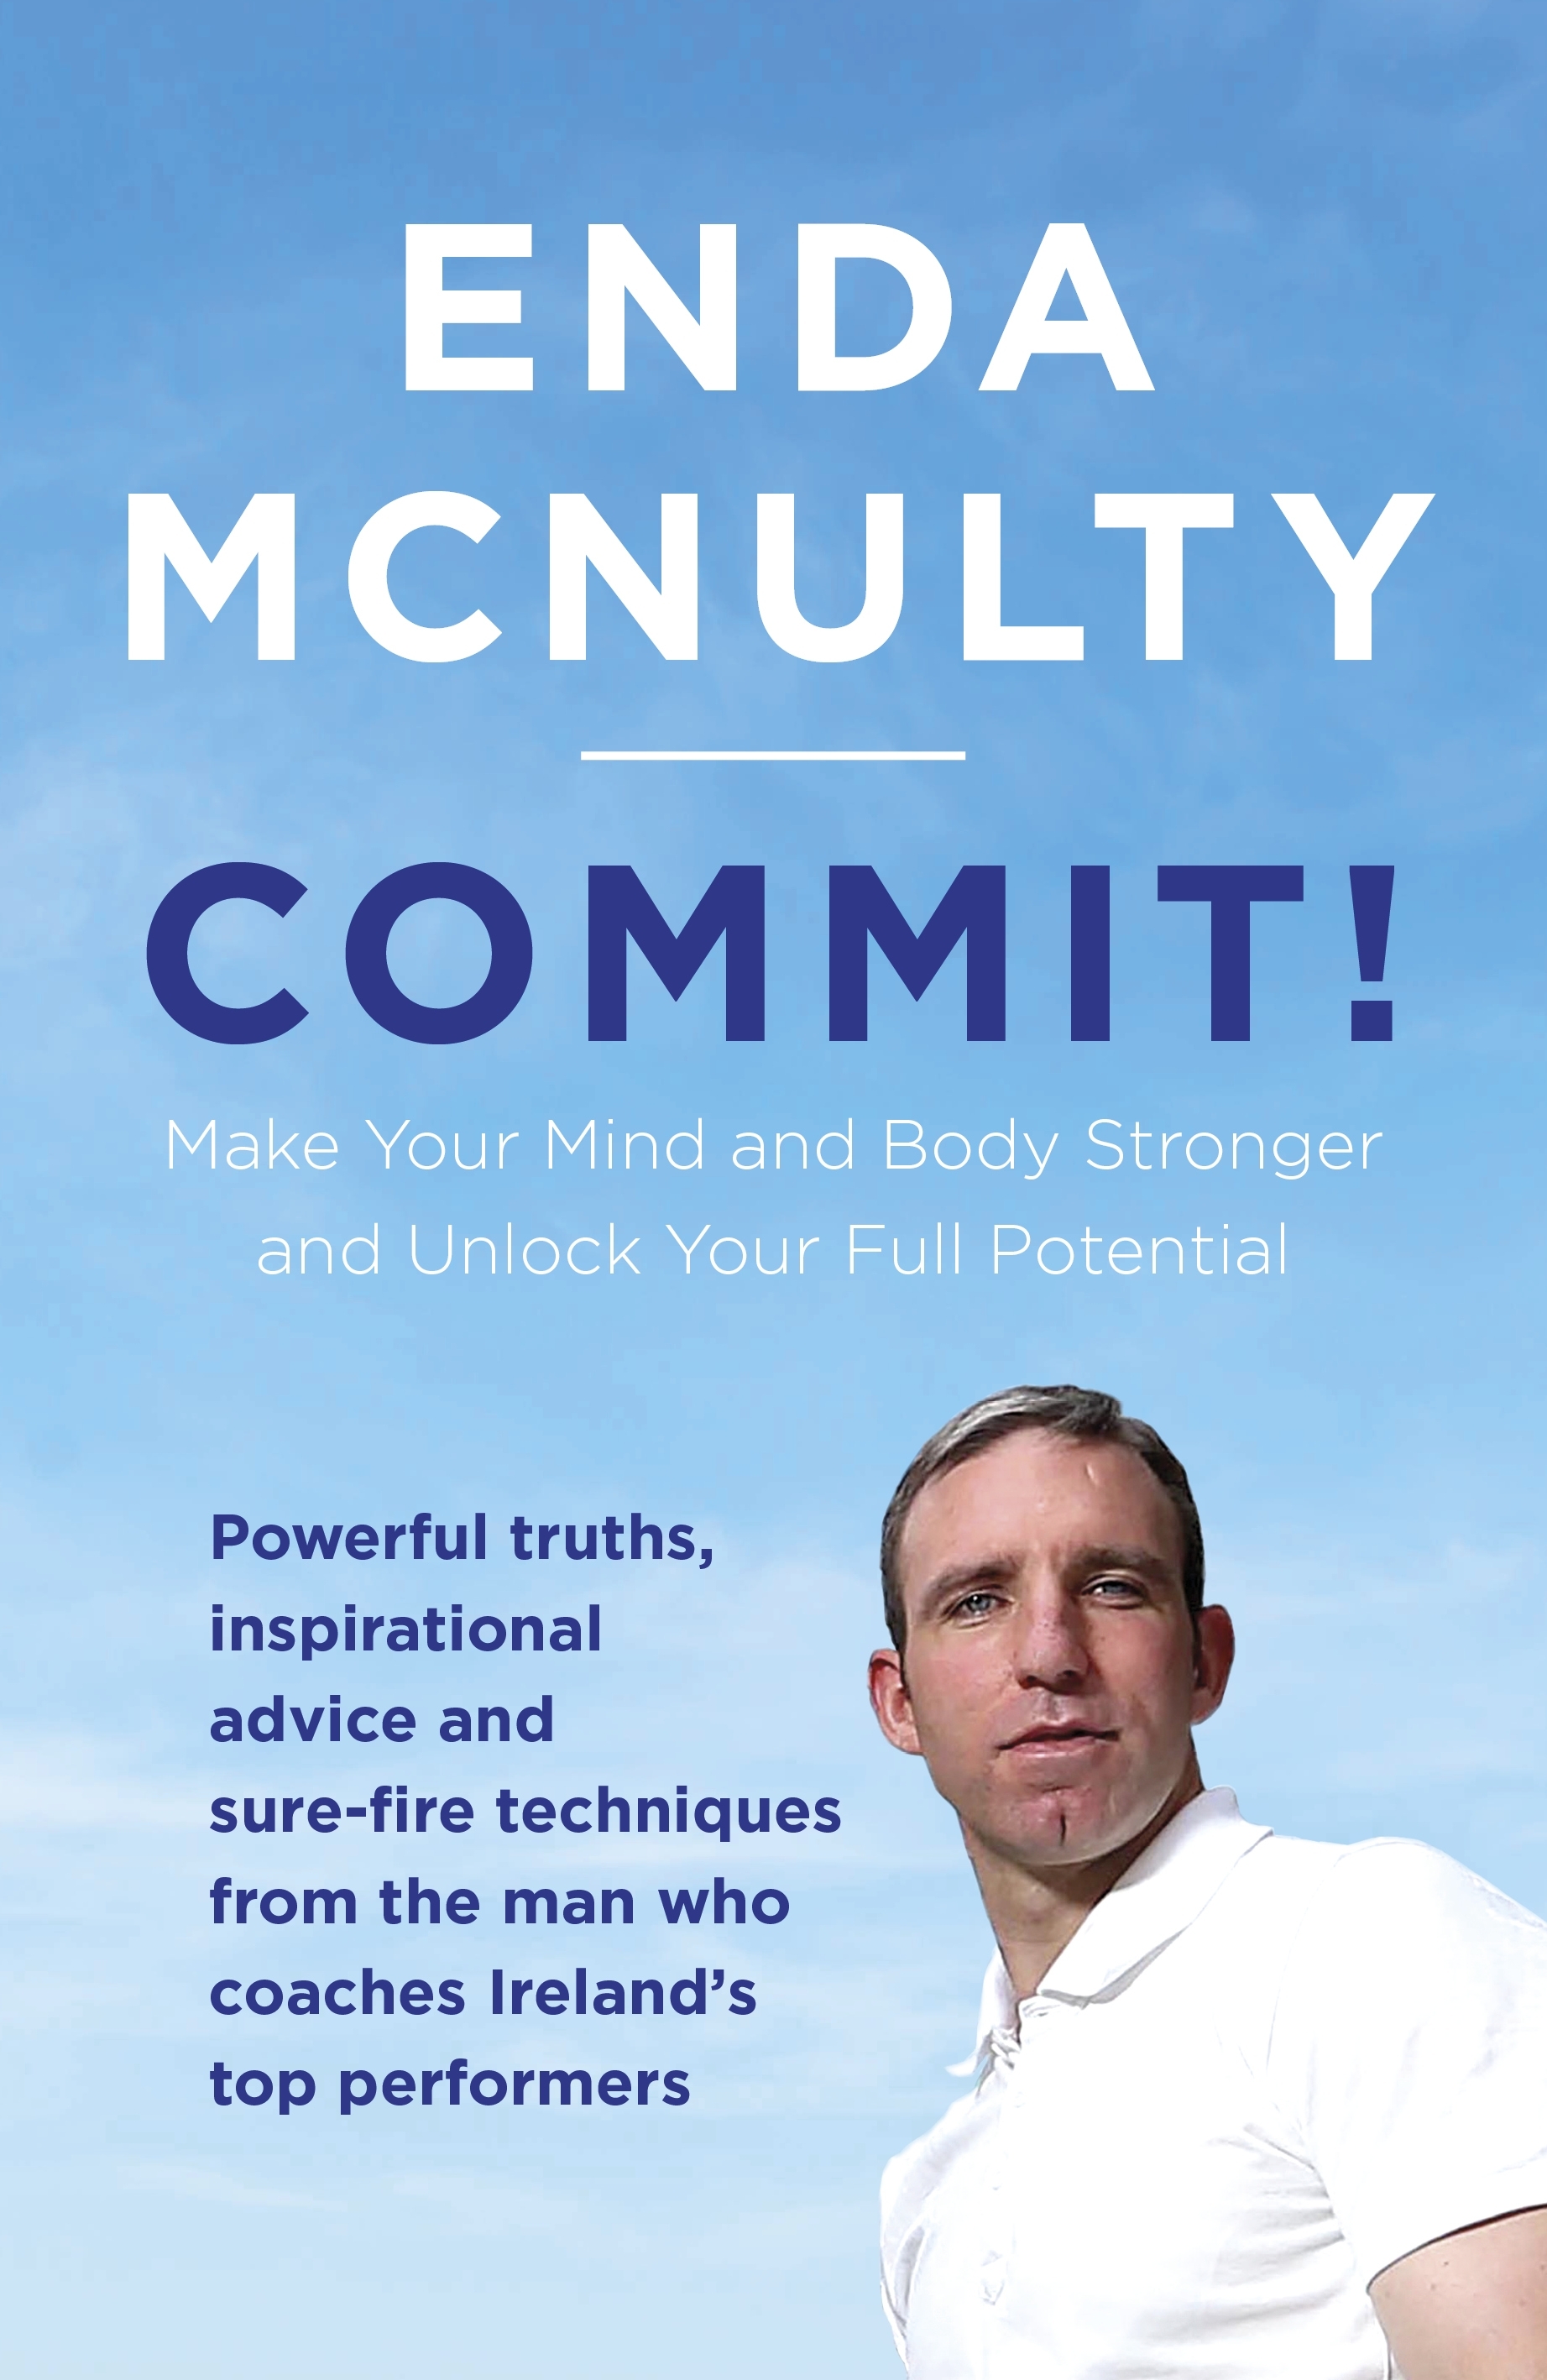 Commit! Make Your Mind and Body Stronger and Unlock Your Full Potential